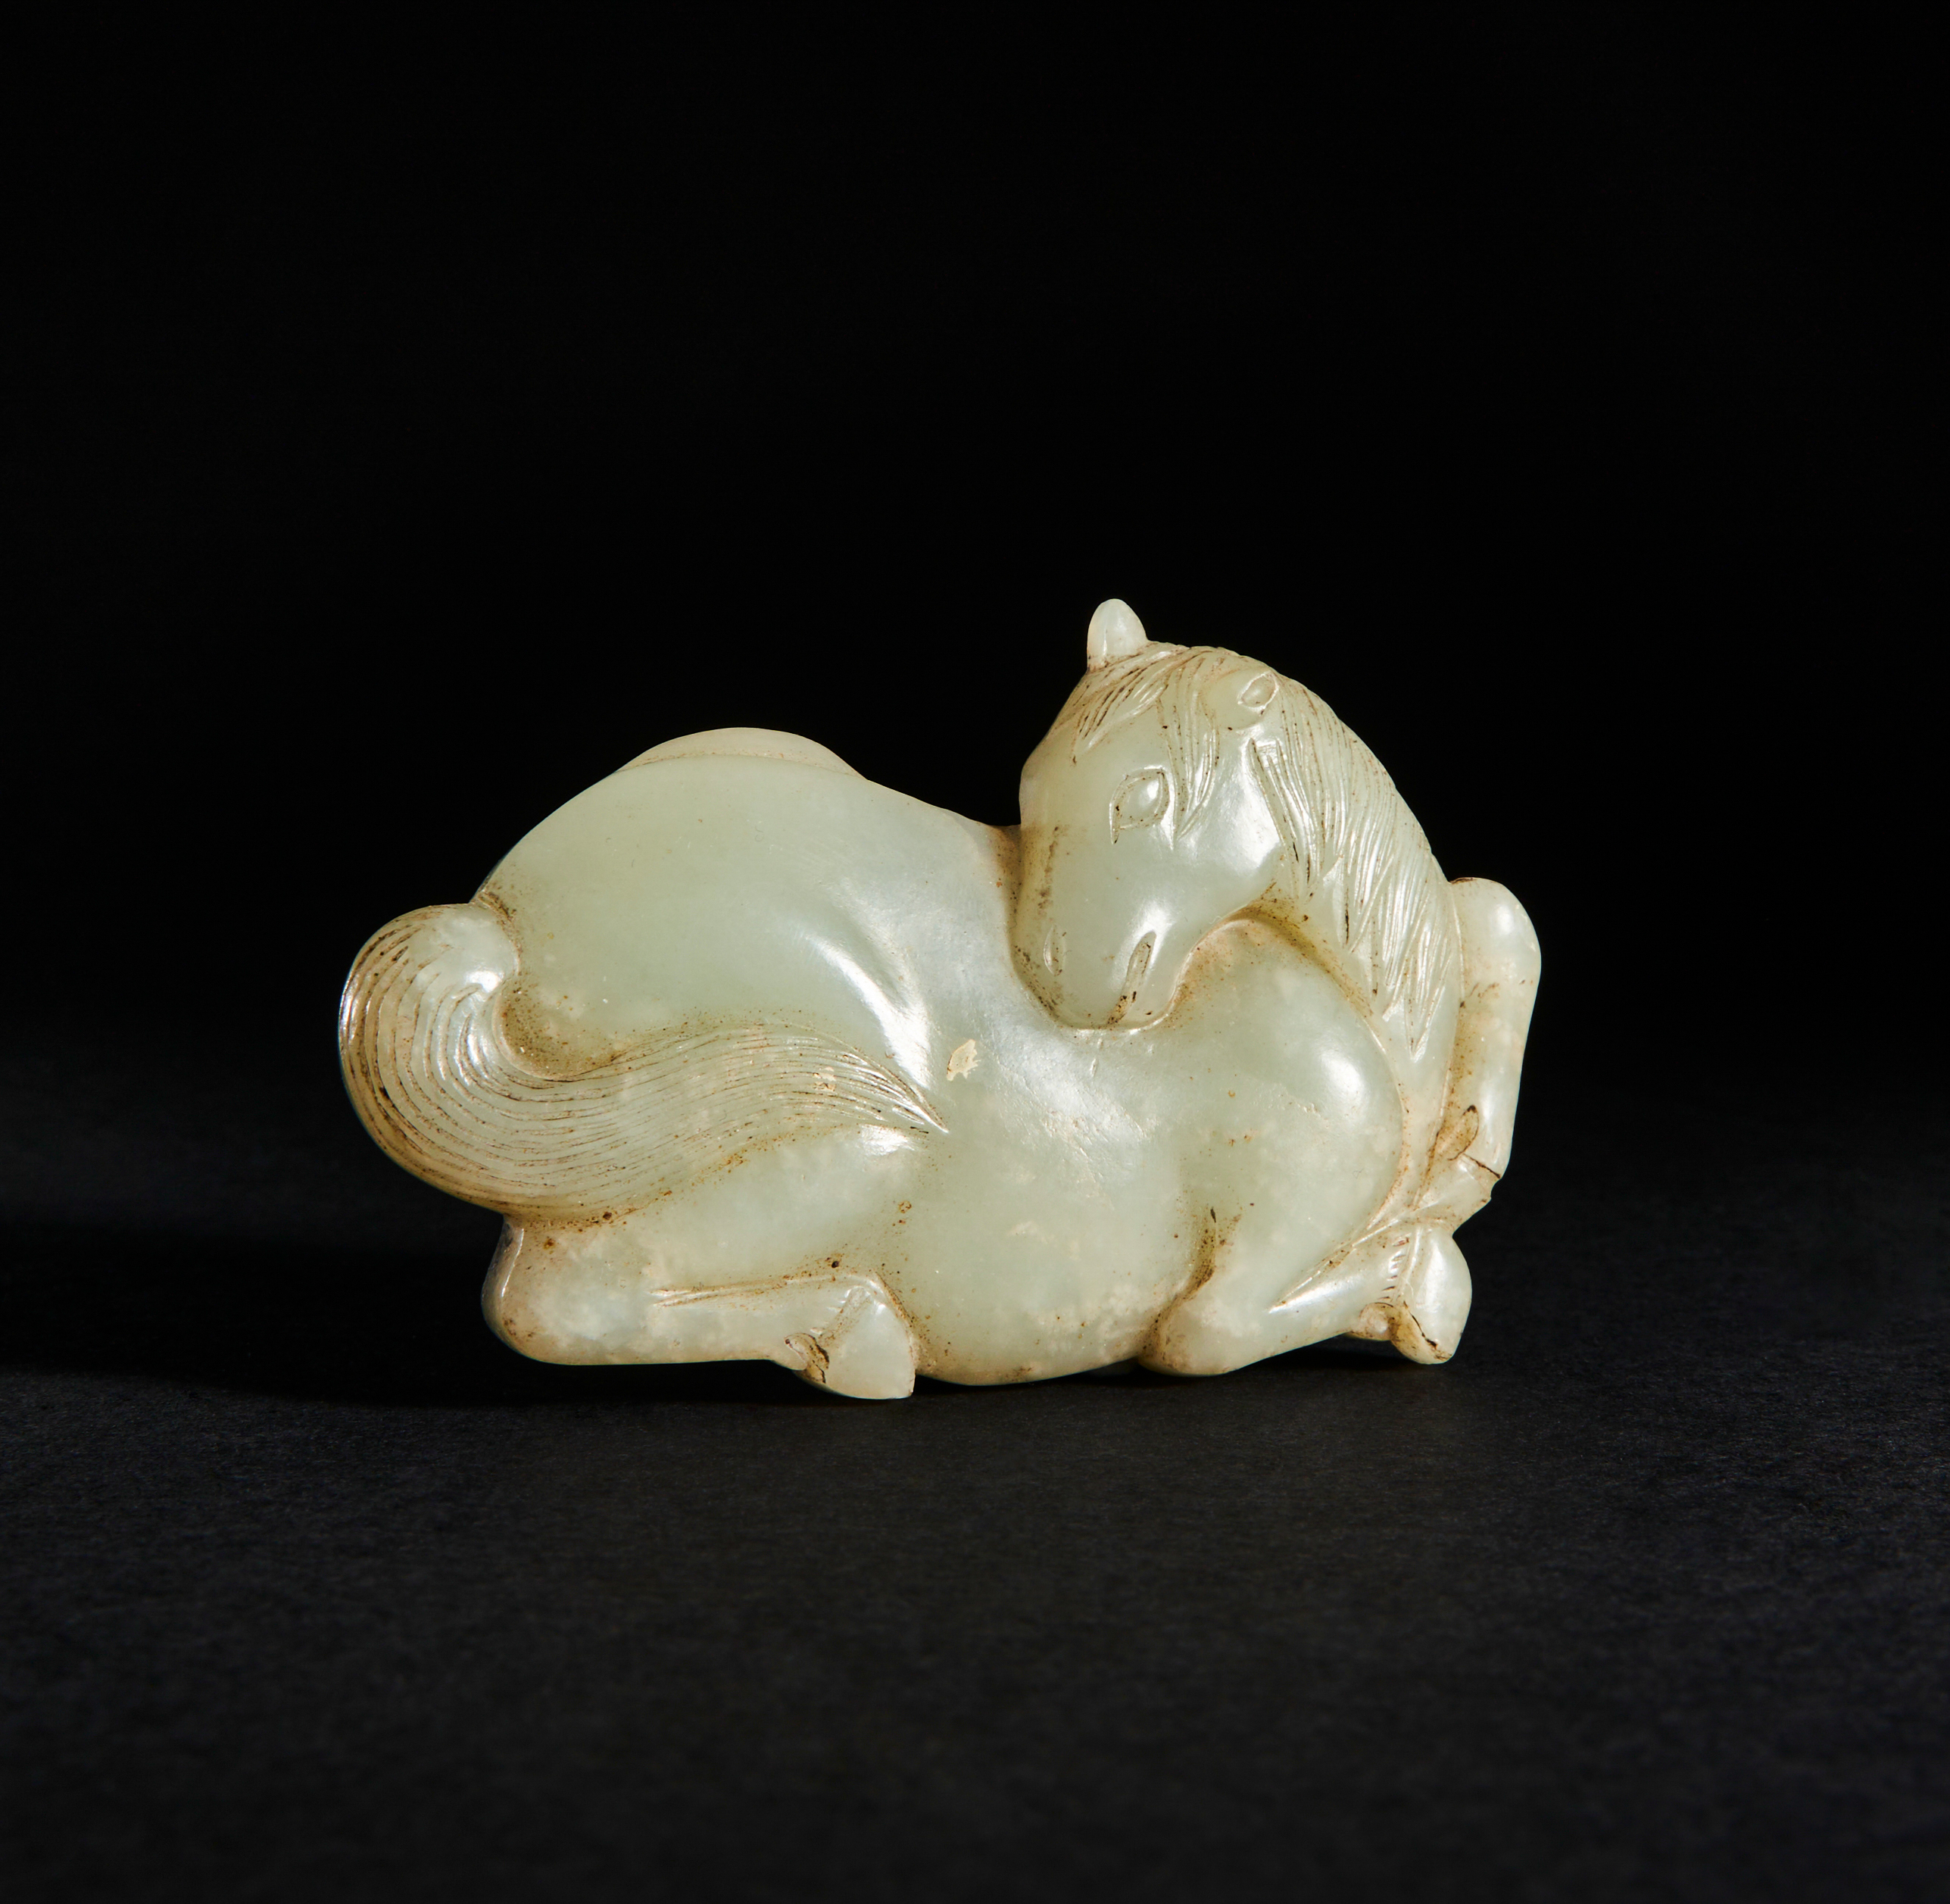 A CHINESE JADE BELT HOOK OF A RECUMBENT HORSE, QING DYNASTY (1644-1911)